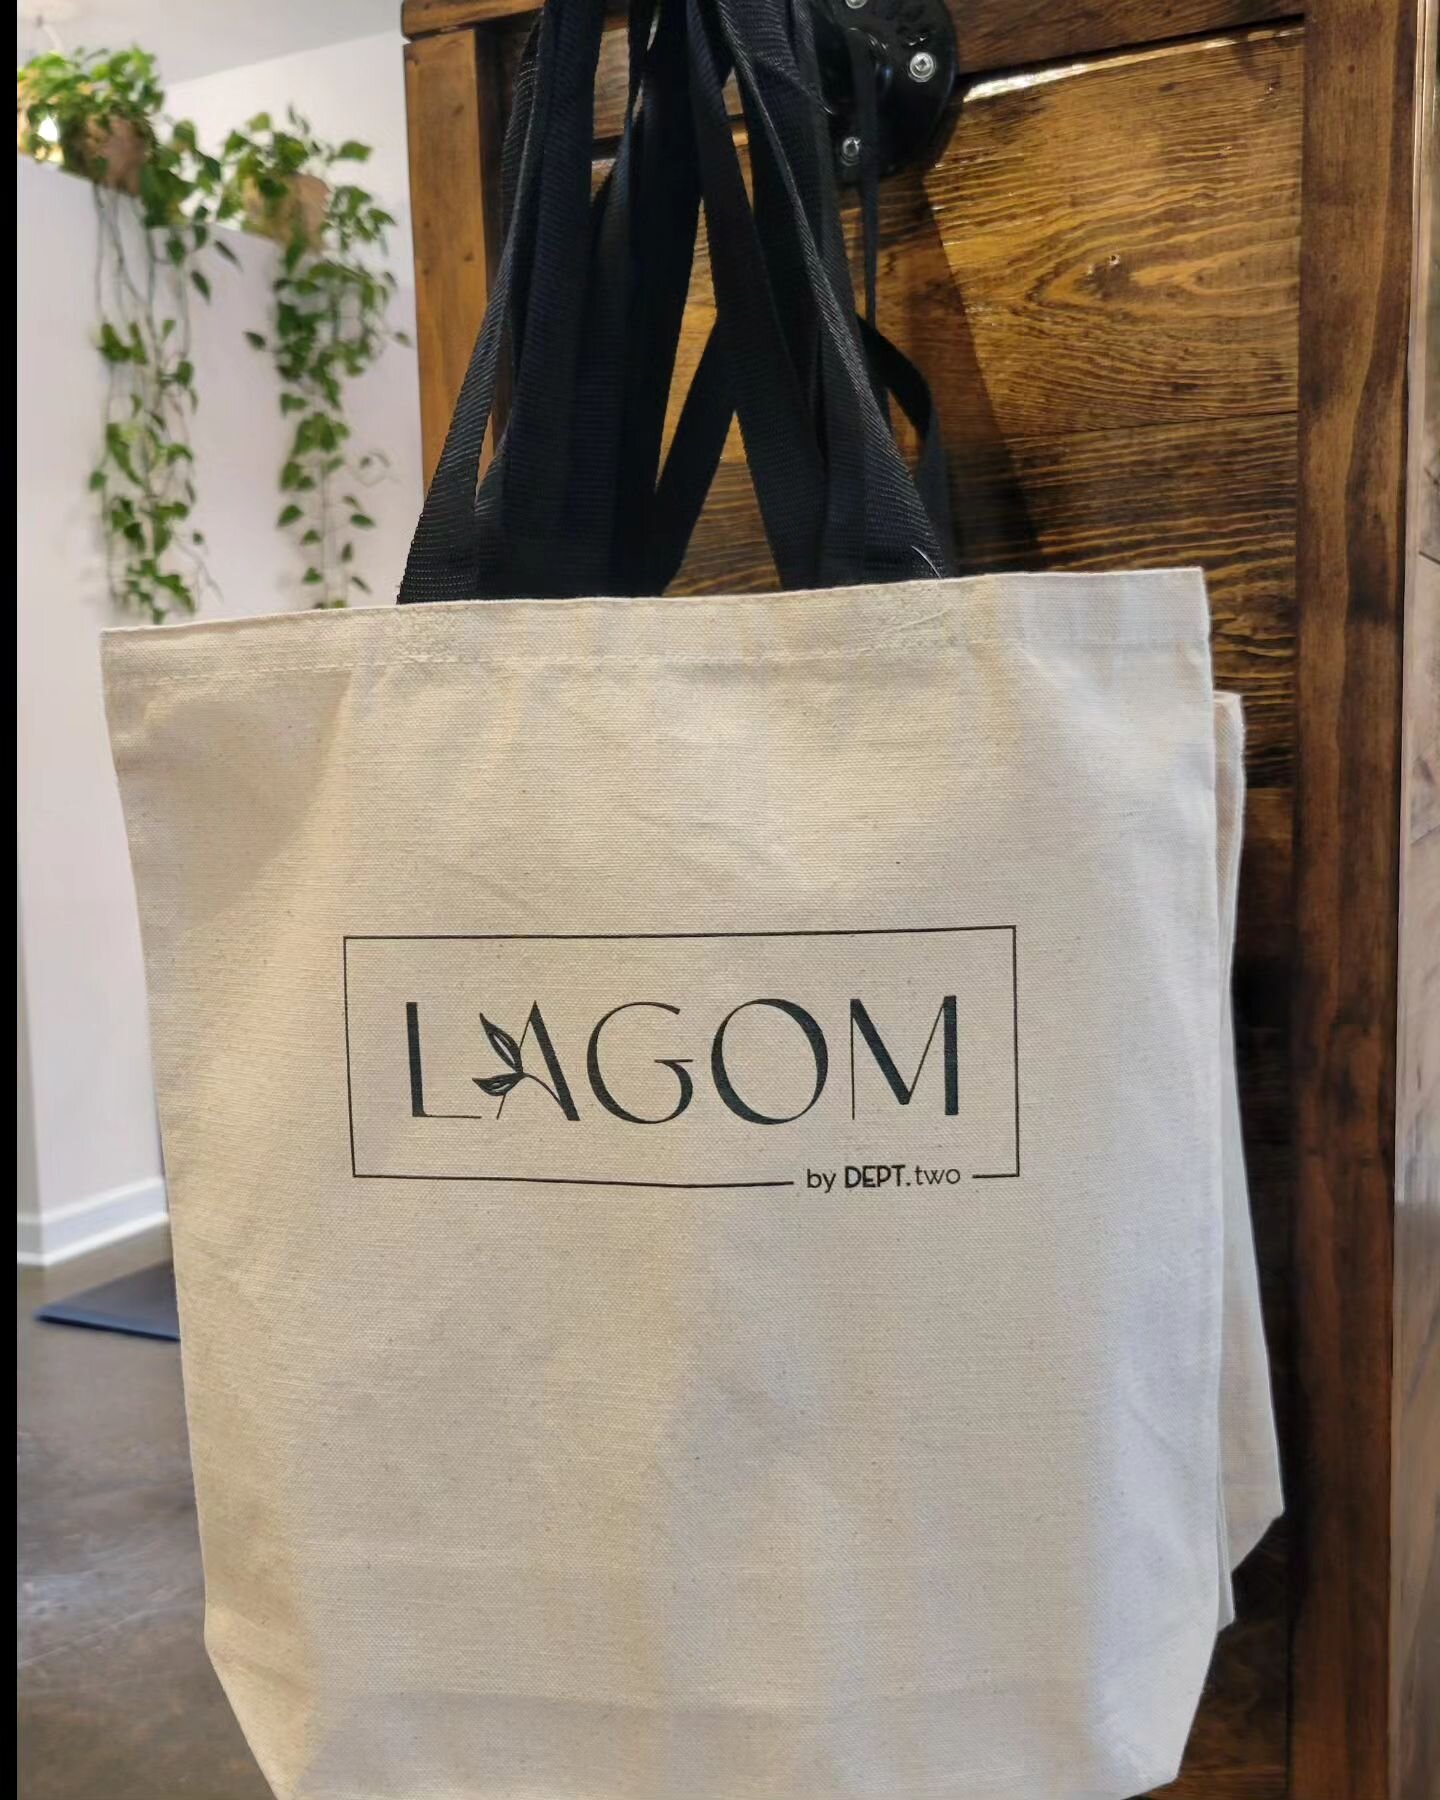 We are 8 weeks from our scheduled 'open' day on 7th Avenue @lagom.by.dept.two 

And there is a special deal for anyone who purchases our branded totes! 

Shop our NEW store with this tote and receive 10% off clothing for ONE YEAR--&gt; That's June 1s